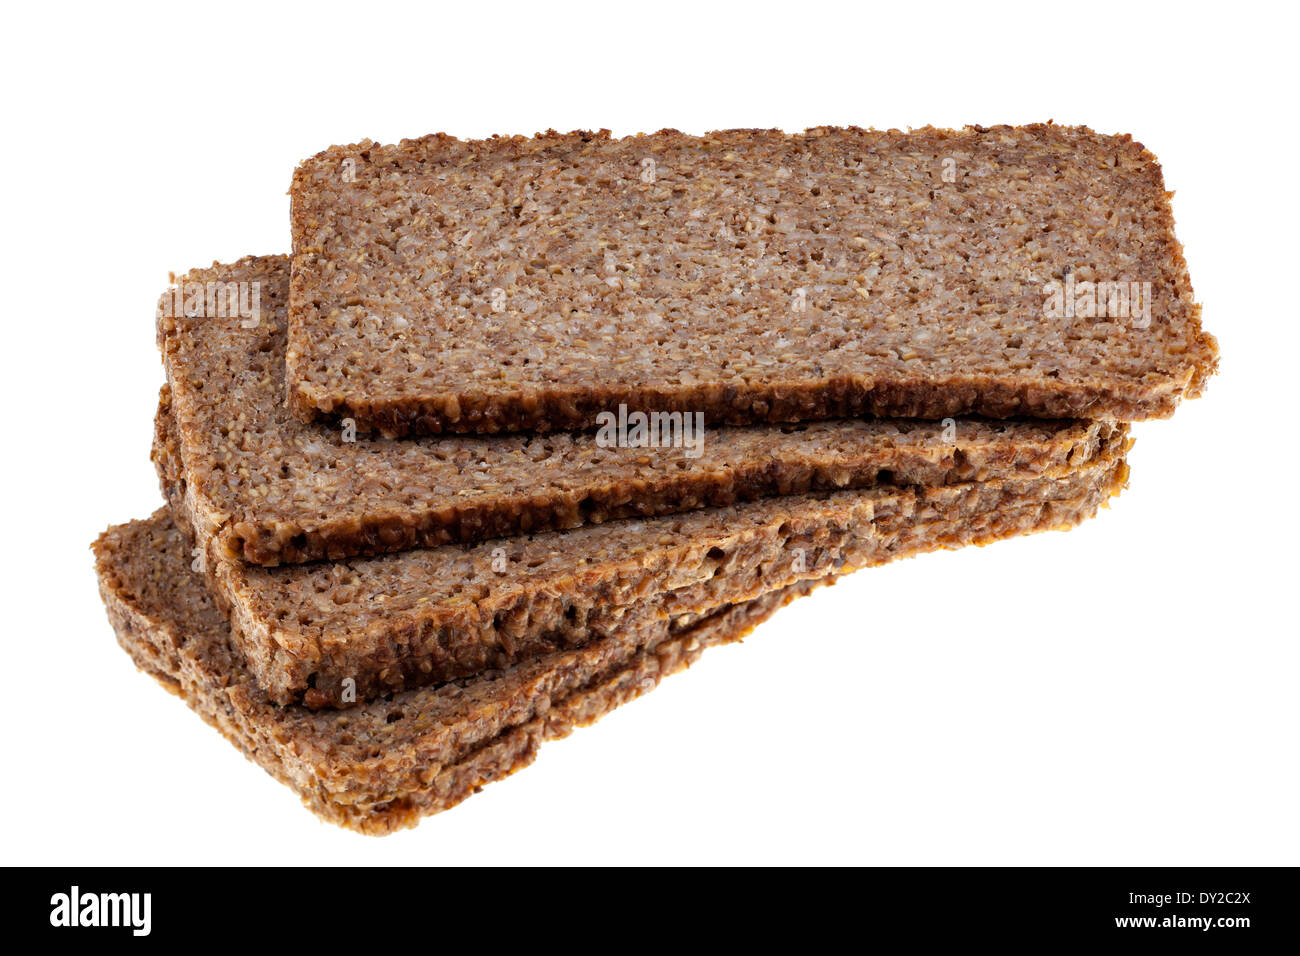 Pile of sliced wholemeal Rye and linseed bread Stock Photo